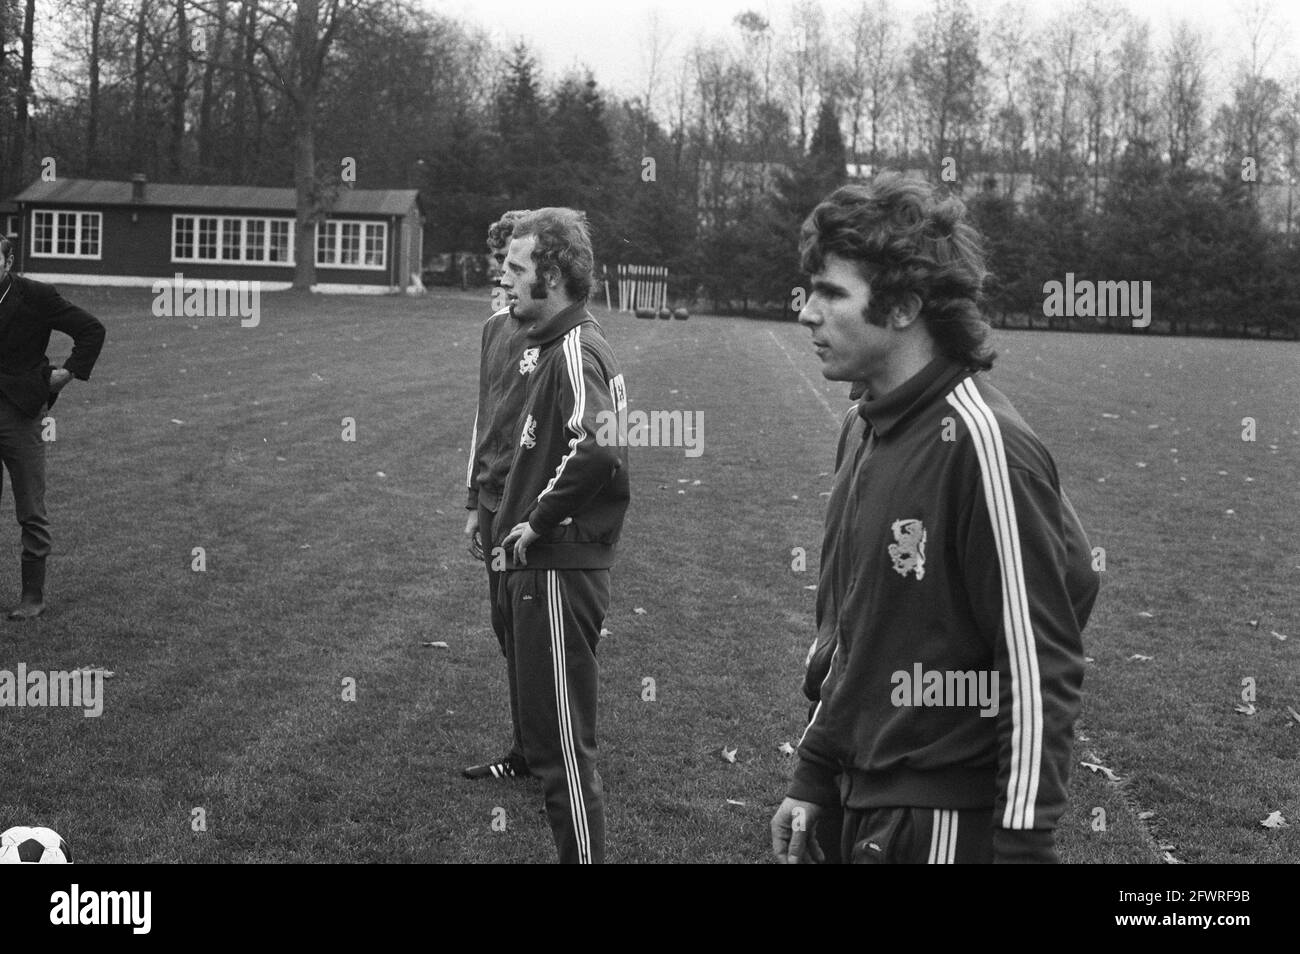 Dutch national team training in Zeist, (l) Oekie Hoekema (r) W. van Hanegem, November 16, 1971, elftallen, sport, soccer, The Netherlands, 20th century press agency photo, news to remember, documentary, historic photography 1945-1990, visual stories, human history of the Twentieth Century, capturing moments in time Stock Photo